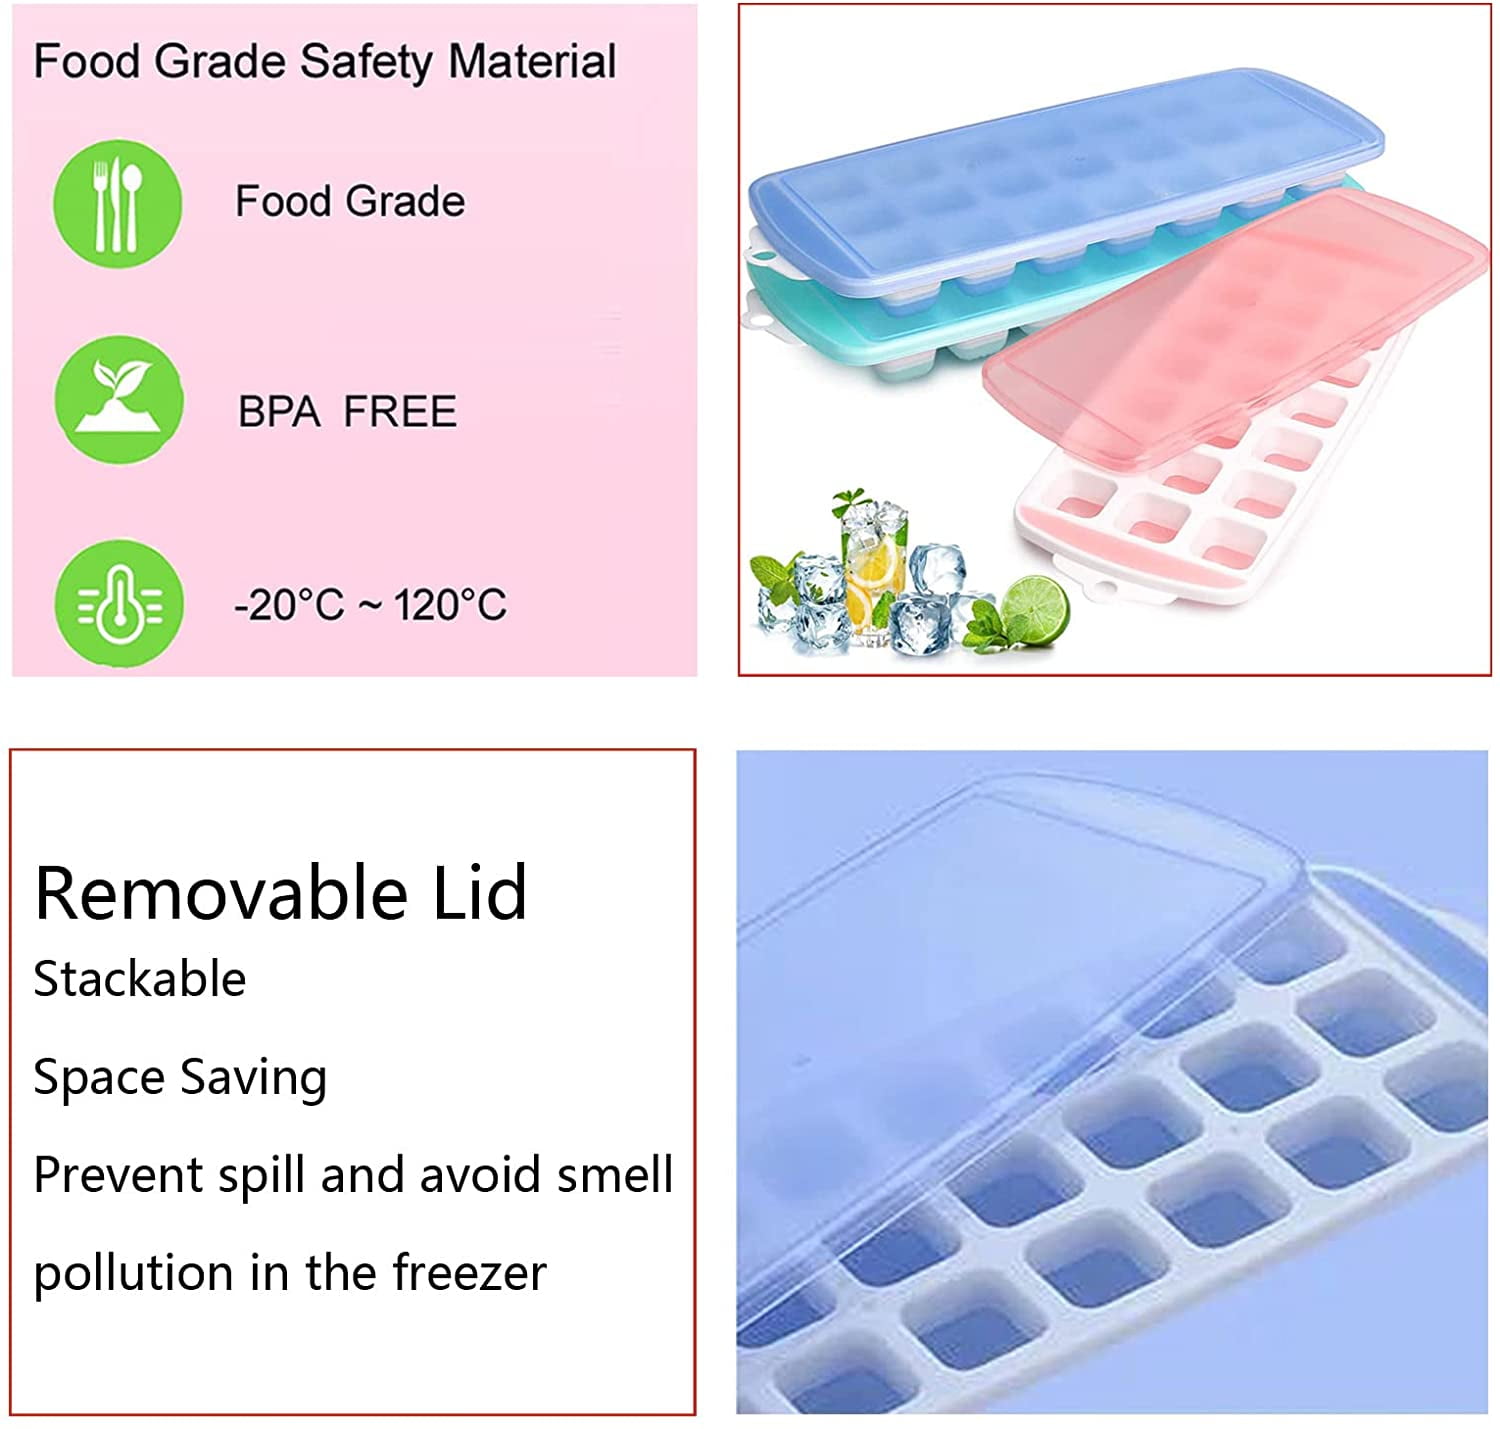 TopAufell Silicone 3Pcs Mini Ice Cube Trays 160 Grids Square Ice Cube Molds  Mini Ice Cube Tray for freezer Baby Food,Water, Whis